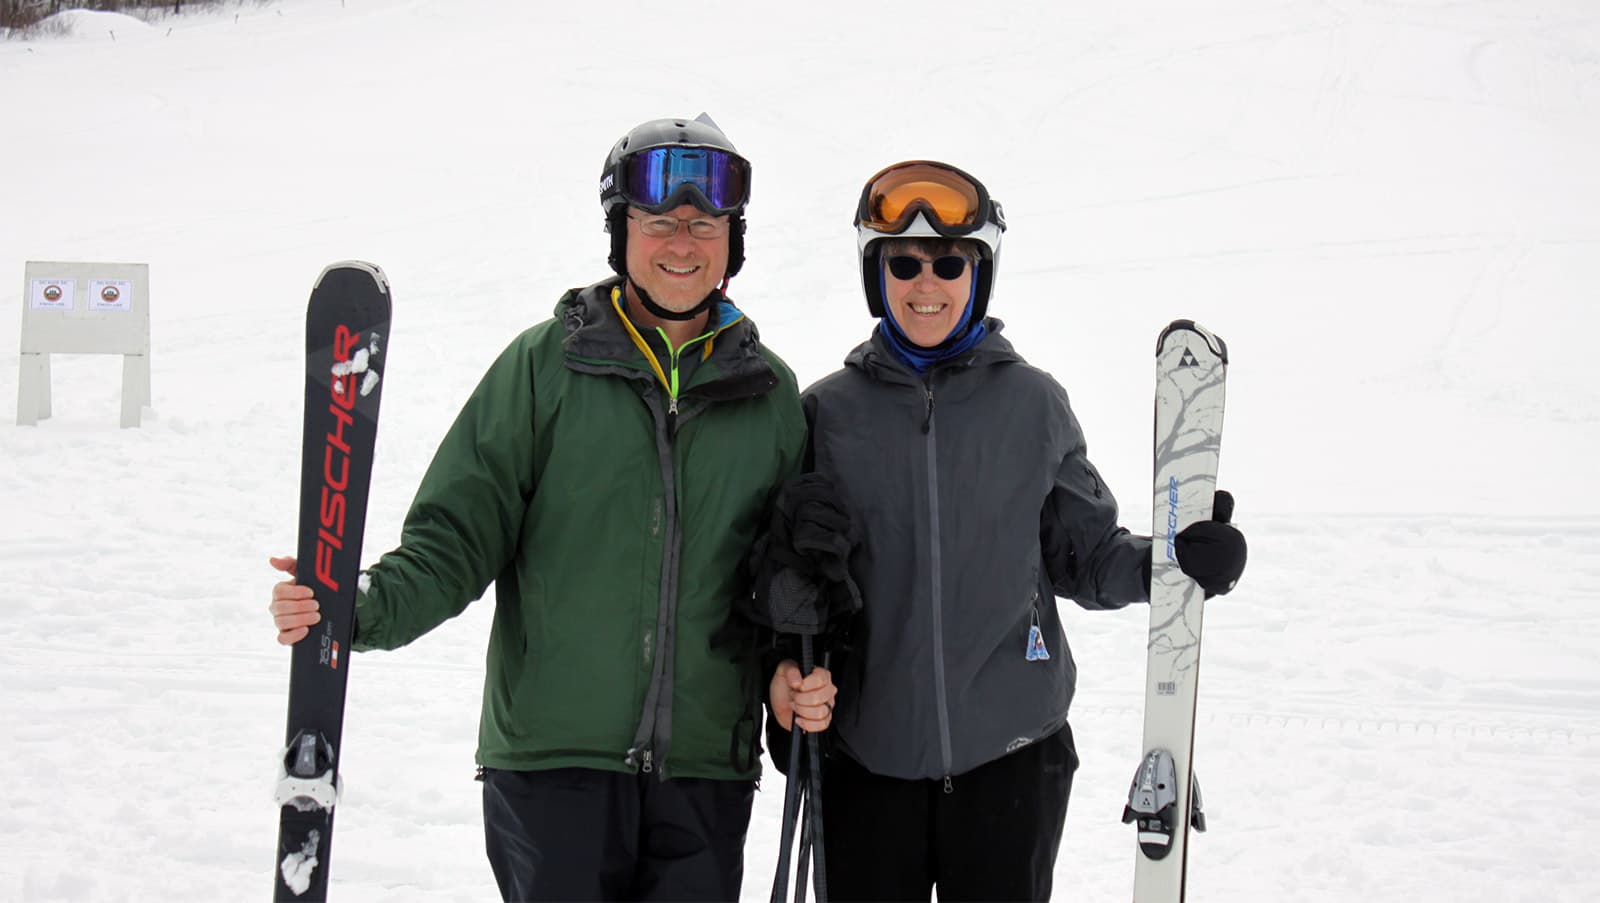 a couple smiles while posing holding their skis at the end of the downhill ski leg of the event